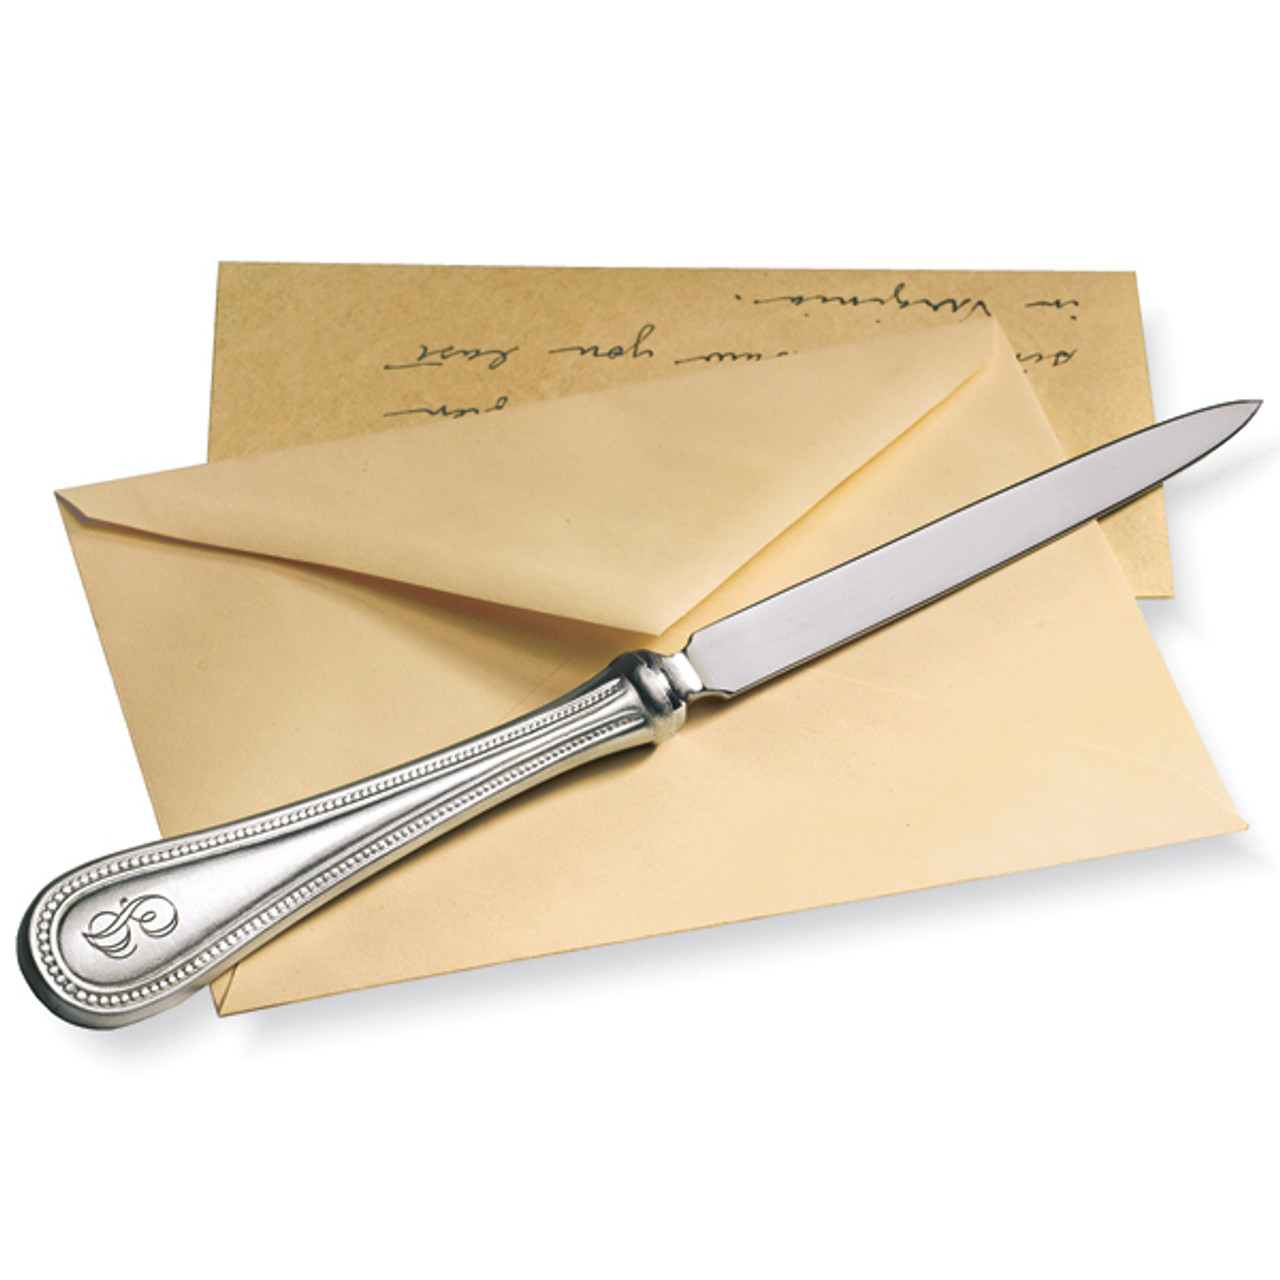 The Complete Letter Opener Guide - Everything About Letter Openers